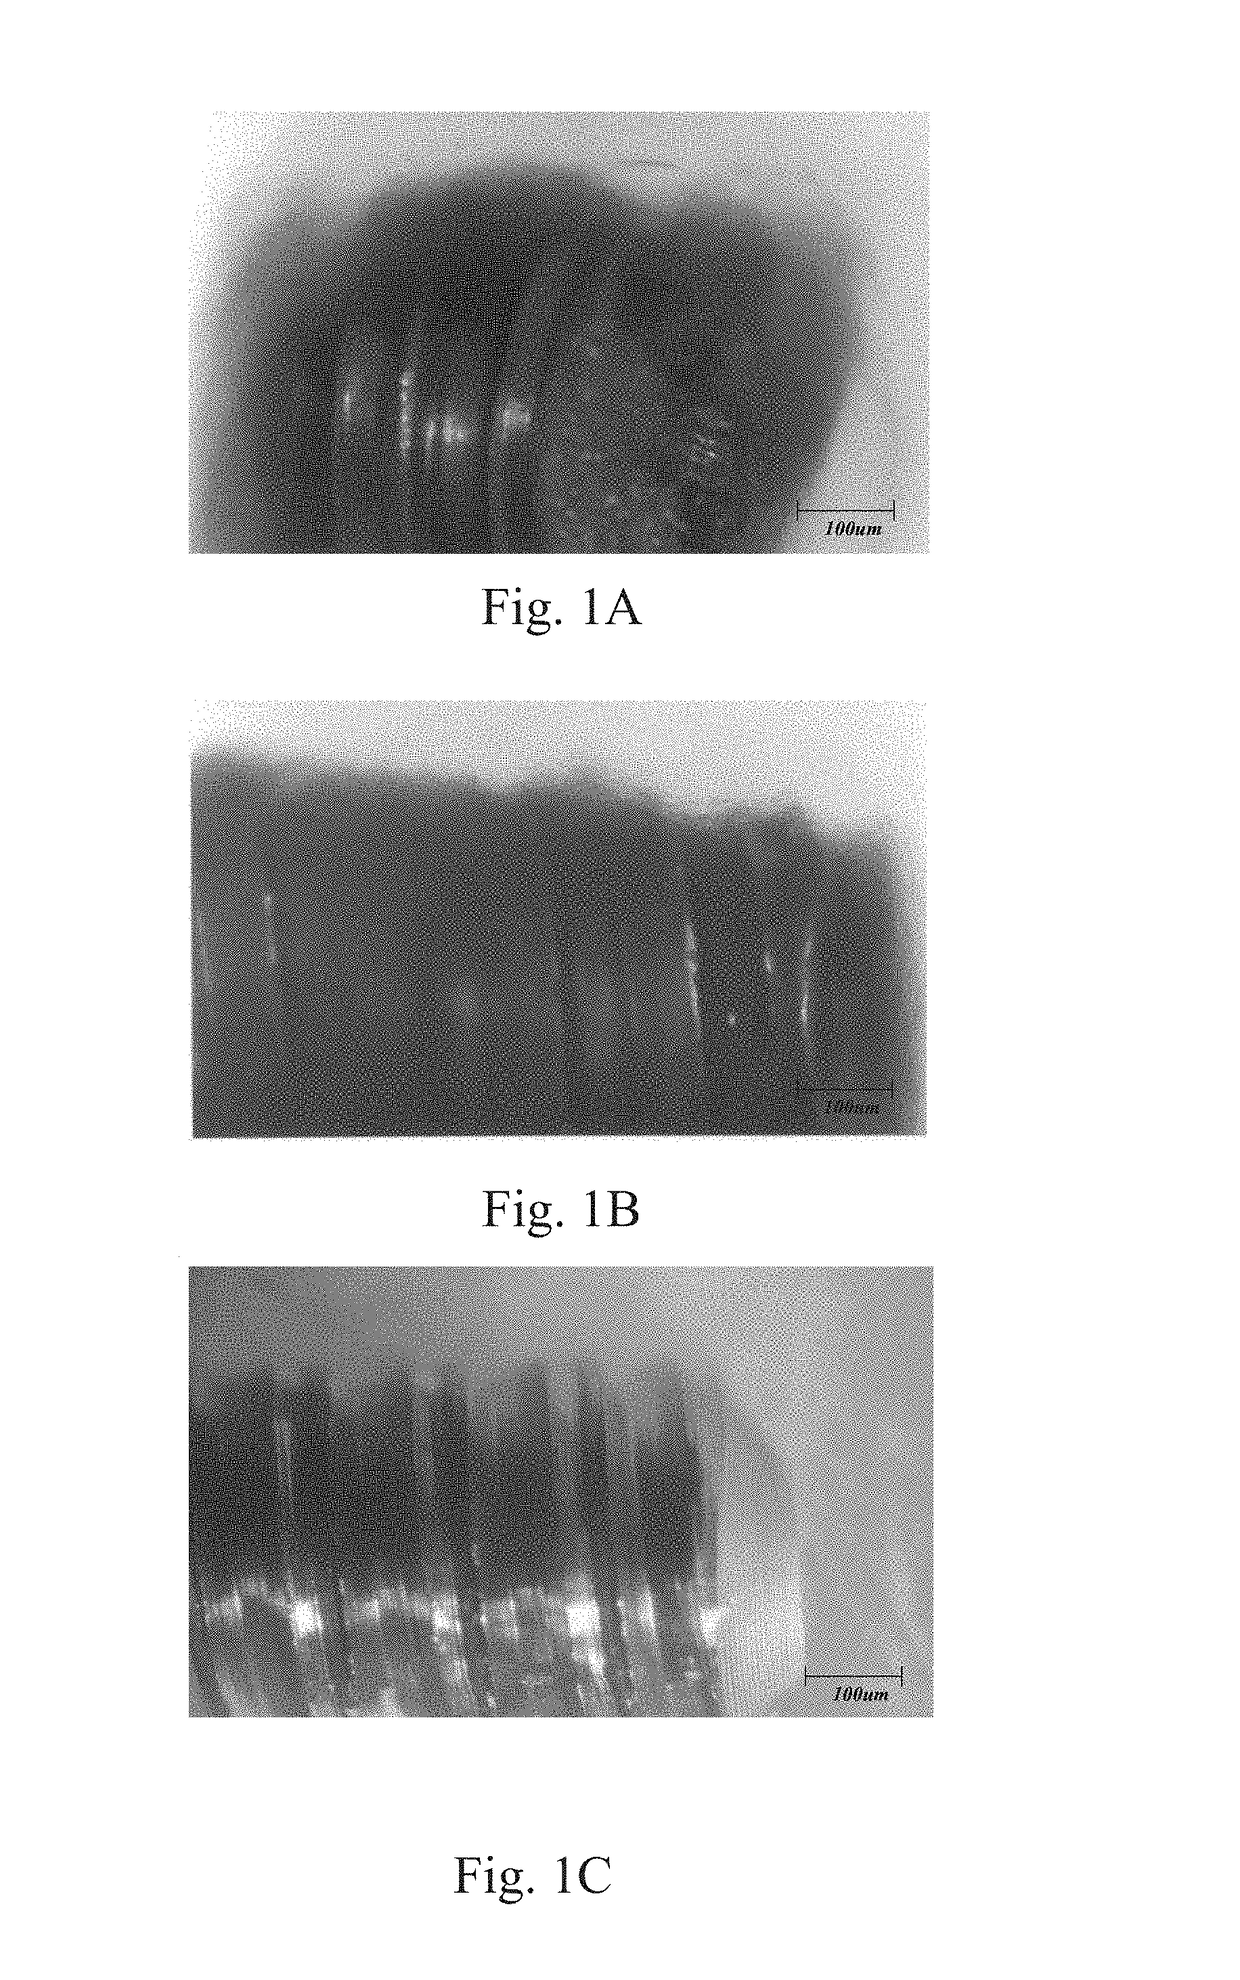 Method of inducing osteogensis and promoting osseointegration around an implant